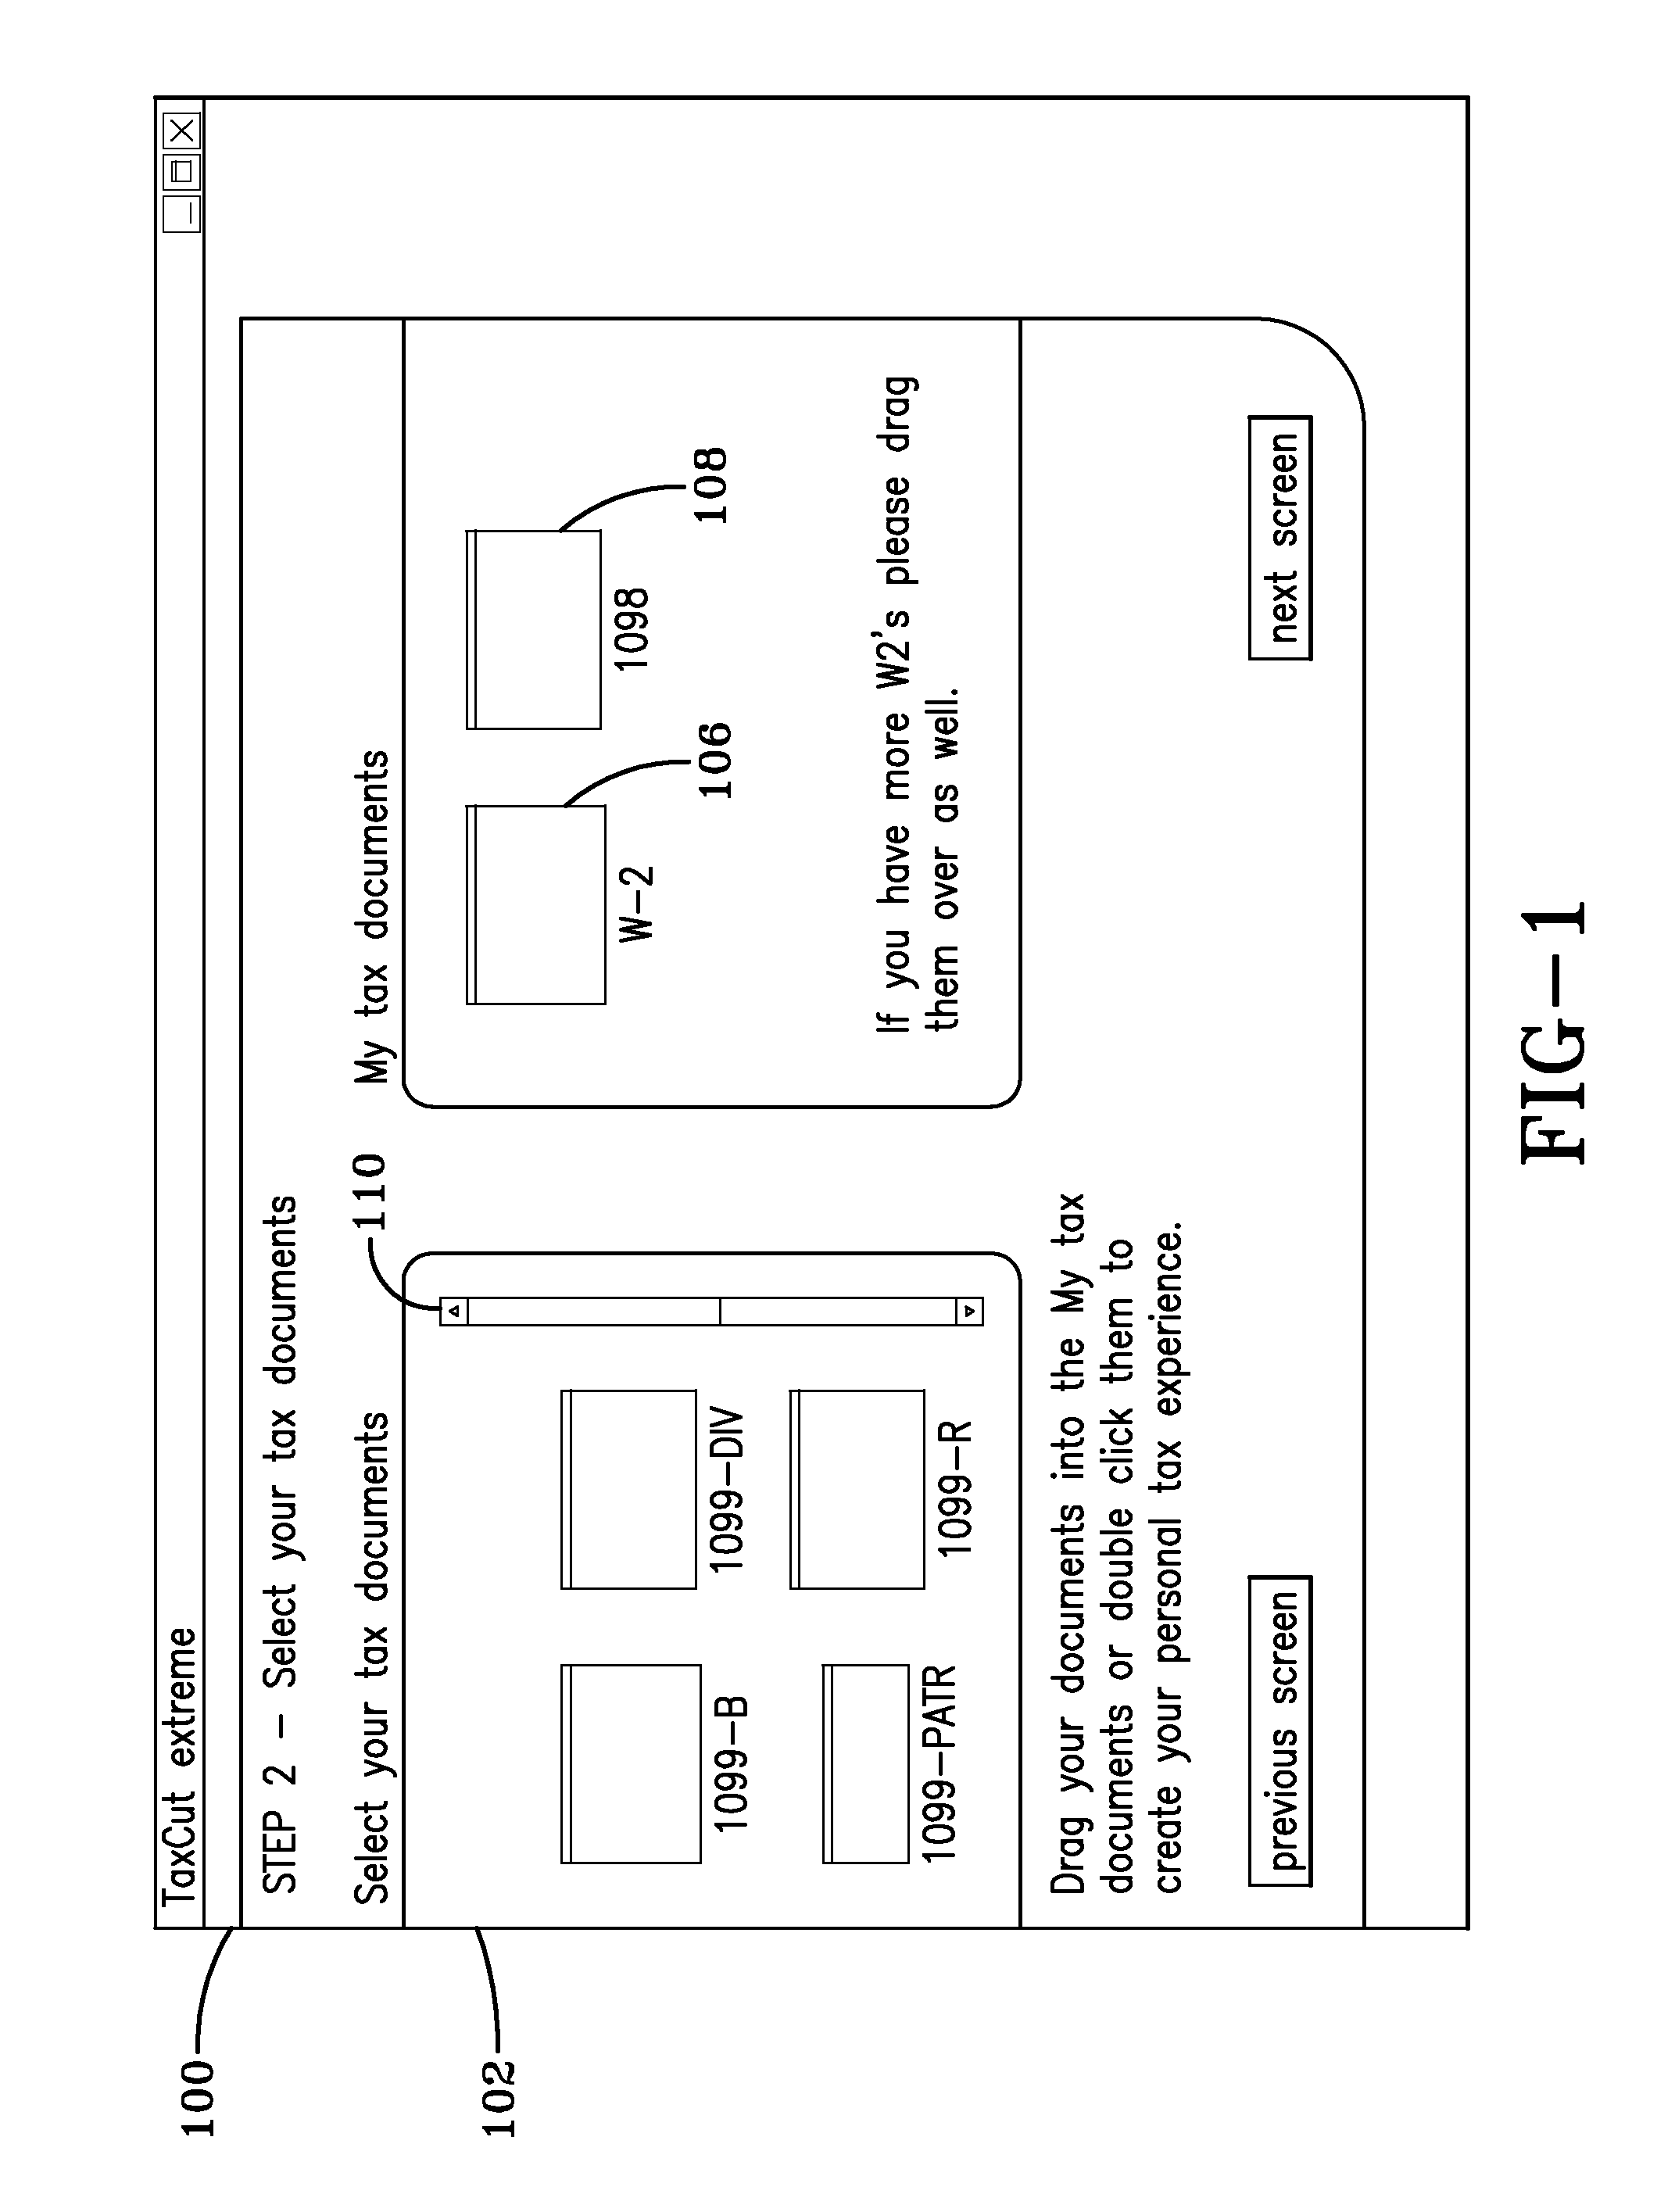 System and method for identifying tax documents to customize preparation of a tax return